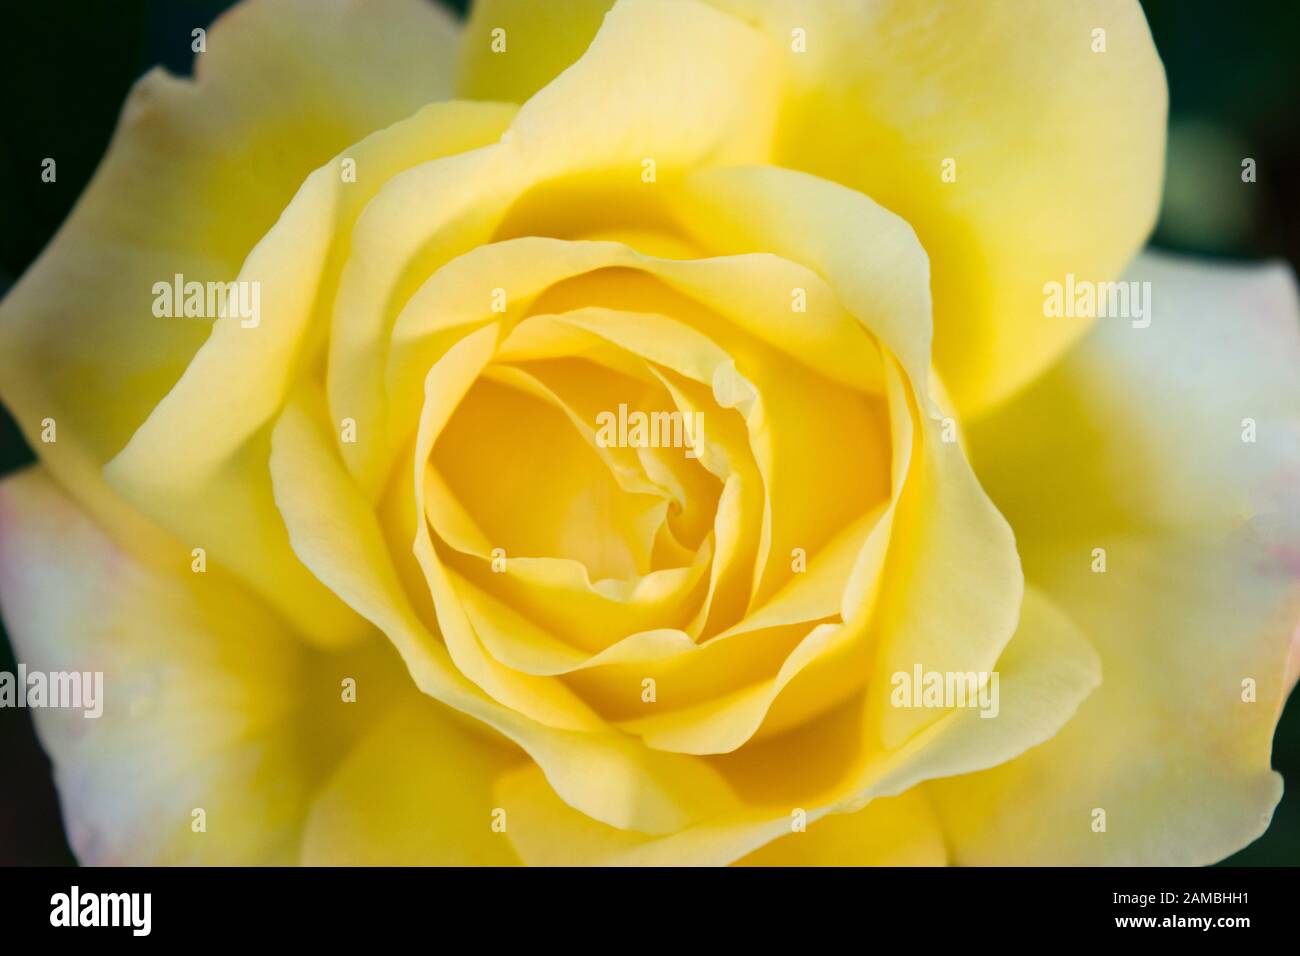 A beautiful yellow rose in a closeup photograph. The color yellow is closely associated with the sun, representing feeling of joy, optimism, happiness. Stock Photo